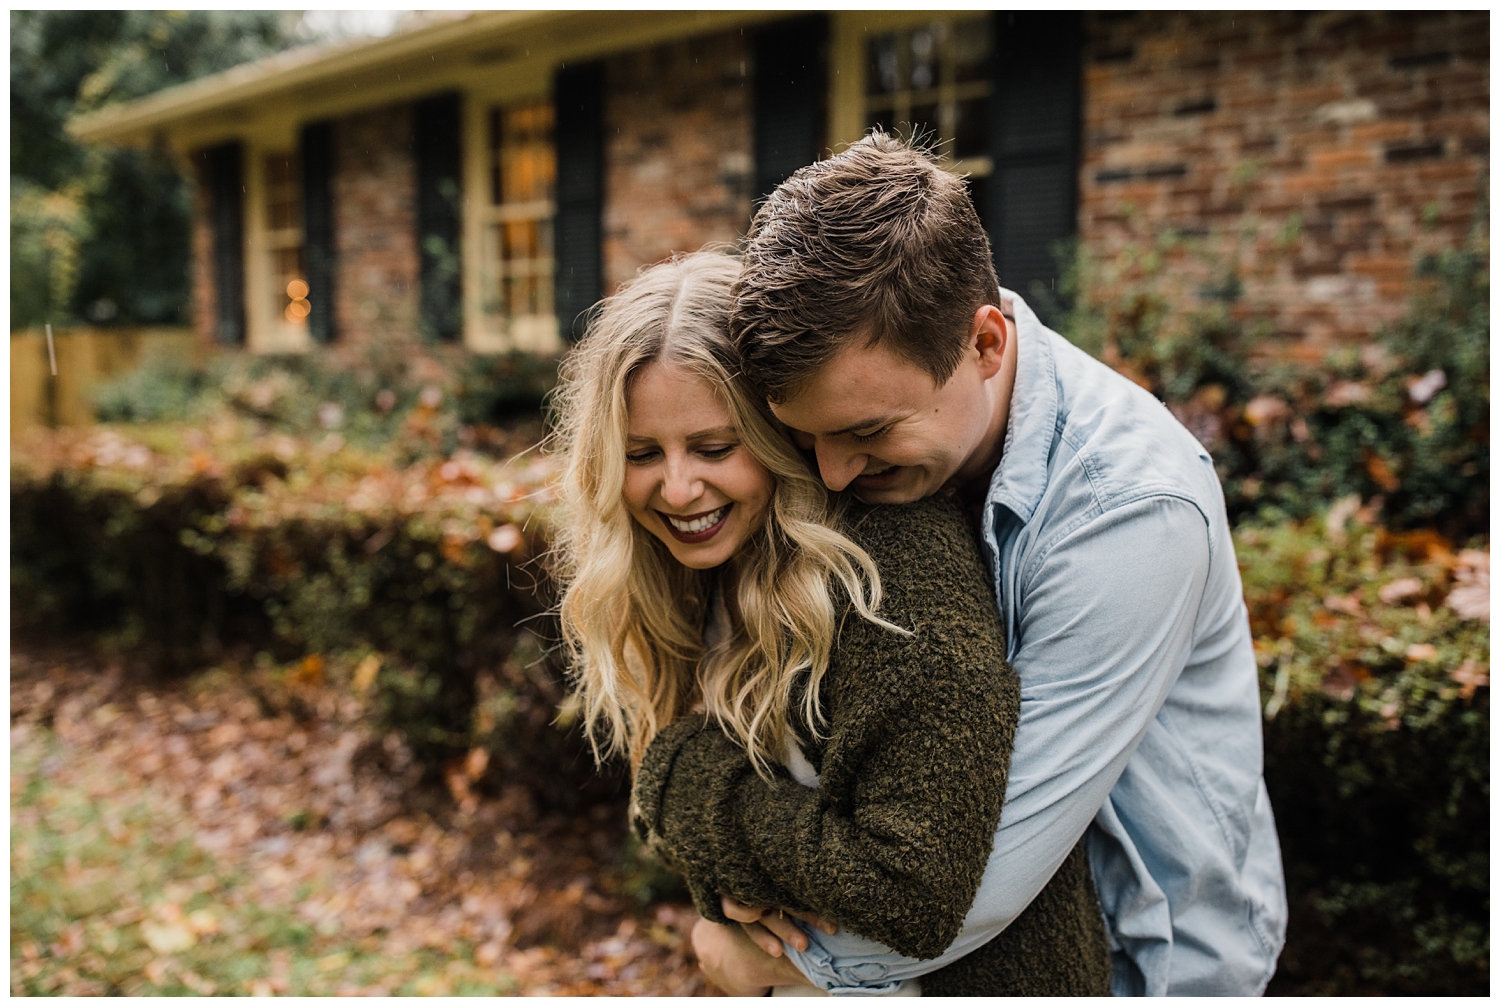 Rainy Day Engagement Session in Marietta, Georgia with cute couple laughing in the rain outside their brick home